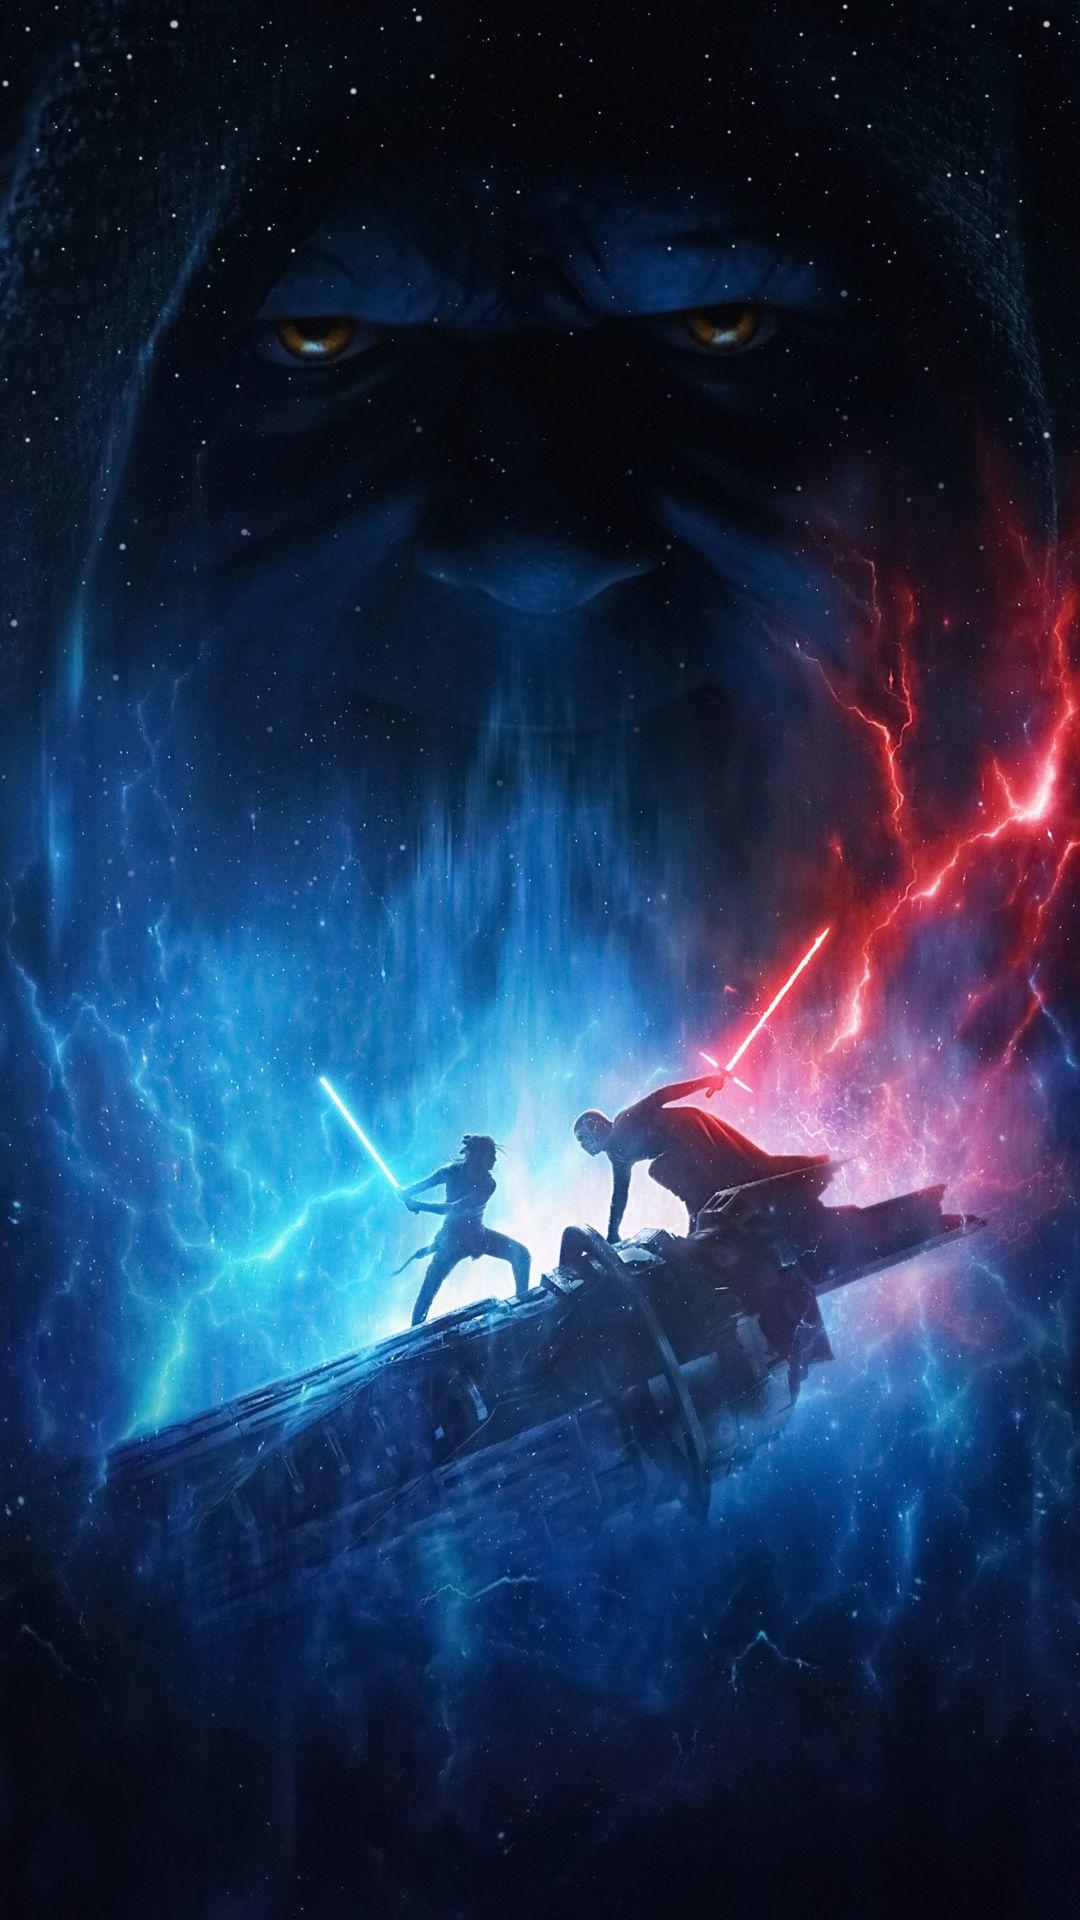 Download wallpaper Star Wars The Rise of Skywalker new poster 1080x1920